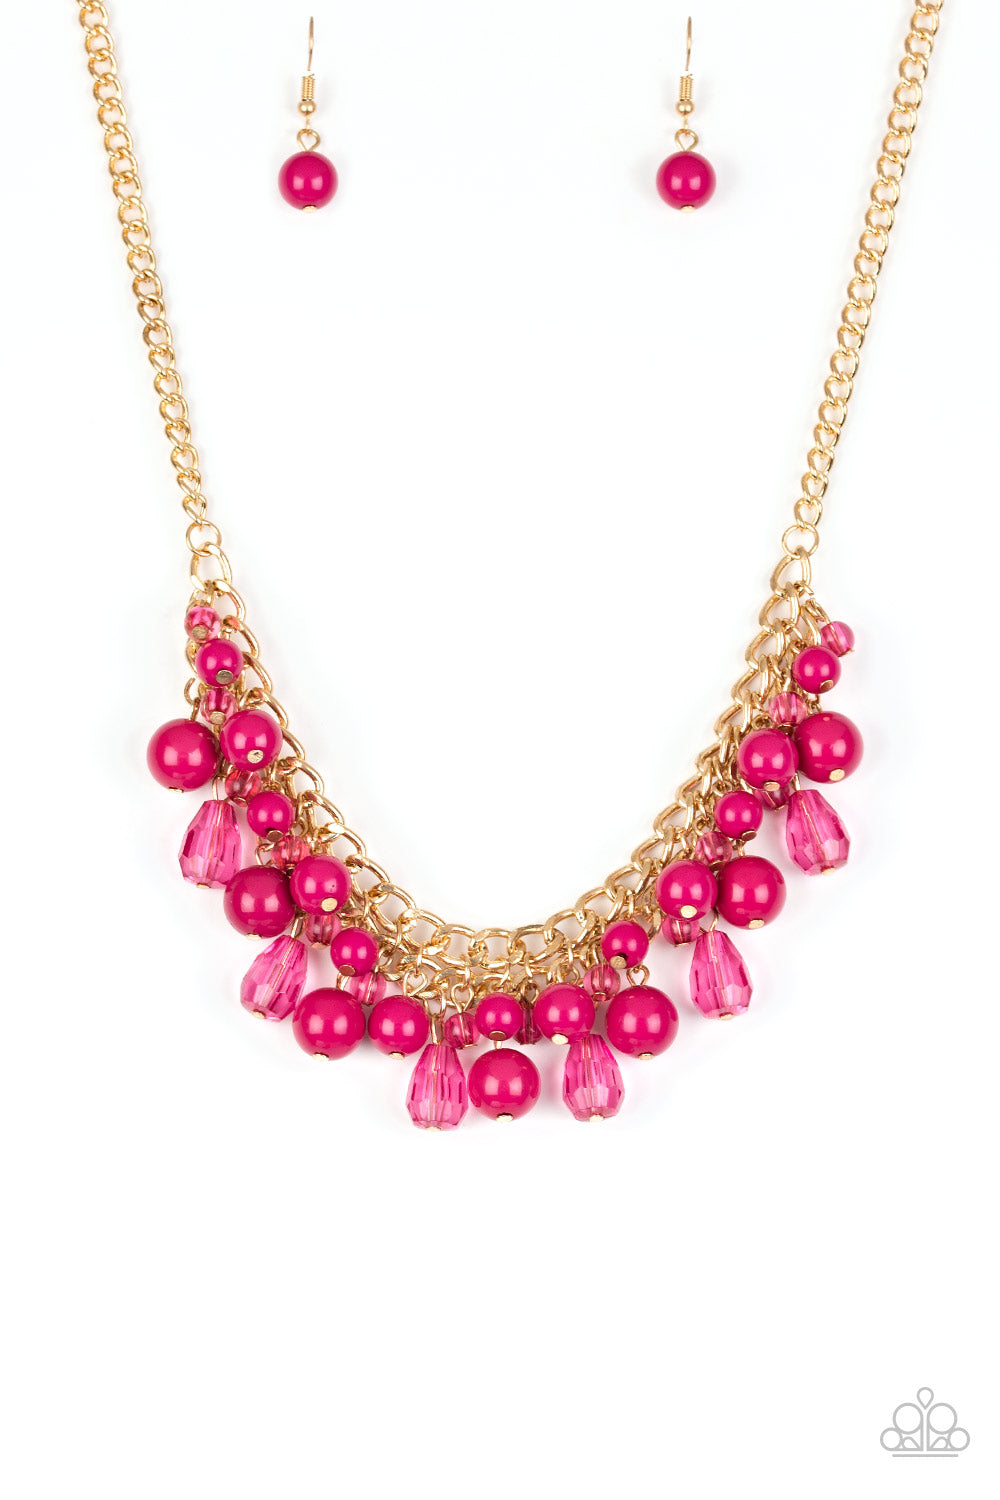 Tour de Trendsetter - Pink - Jazzy Jewels With Lady J